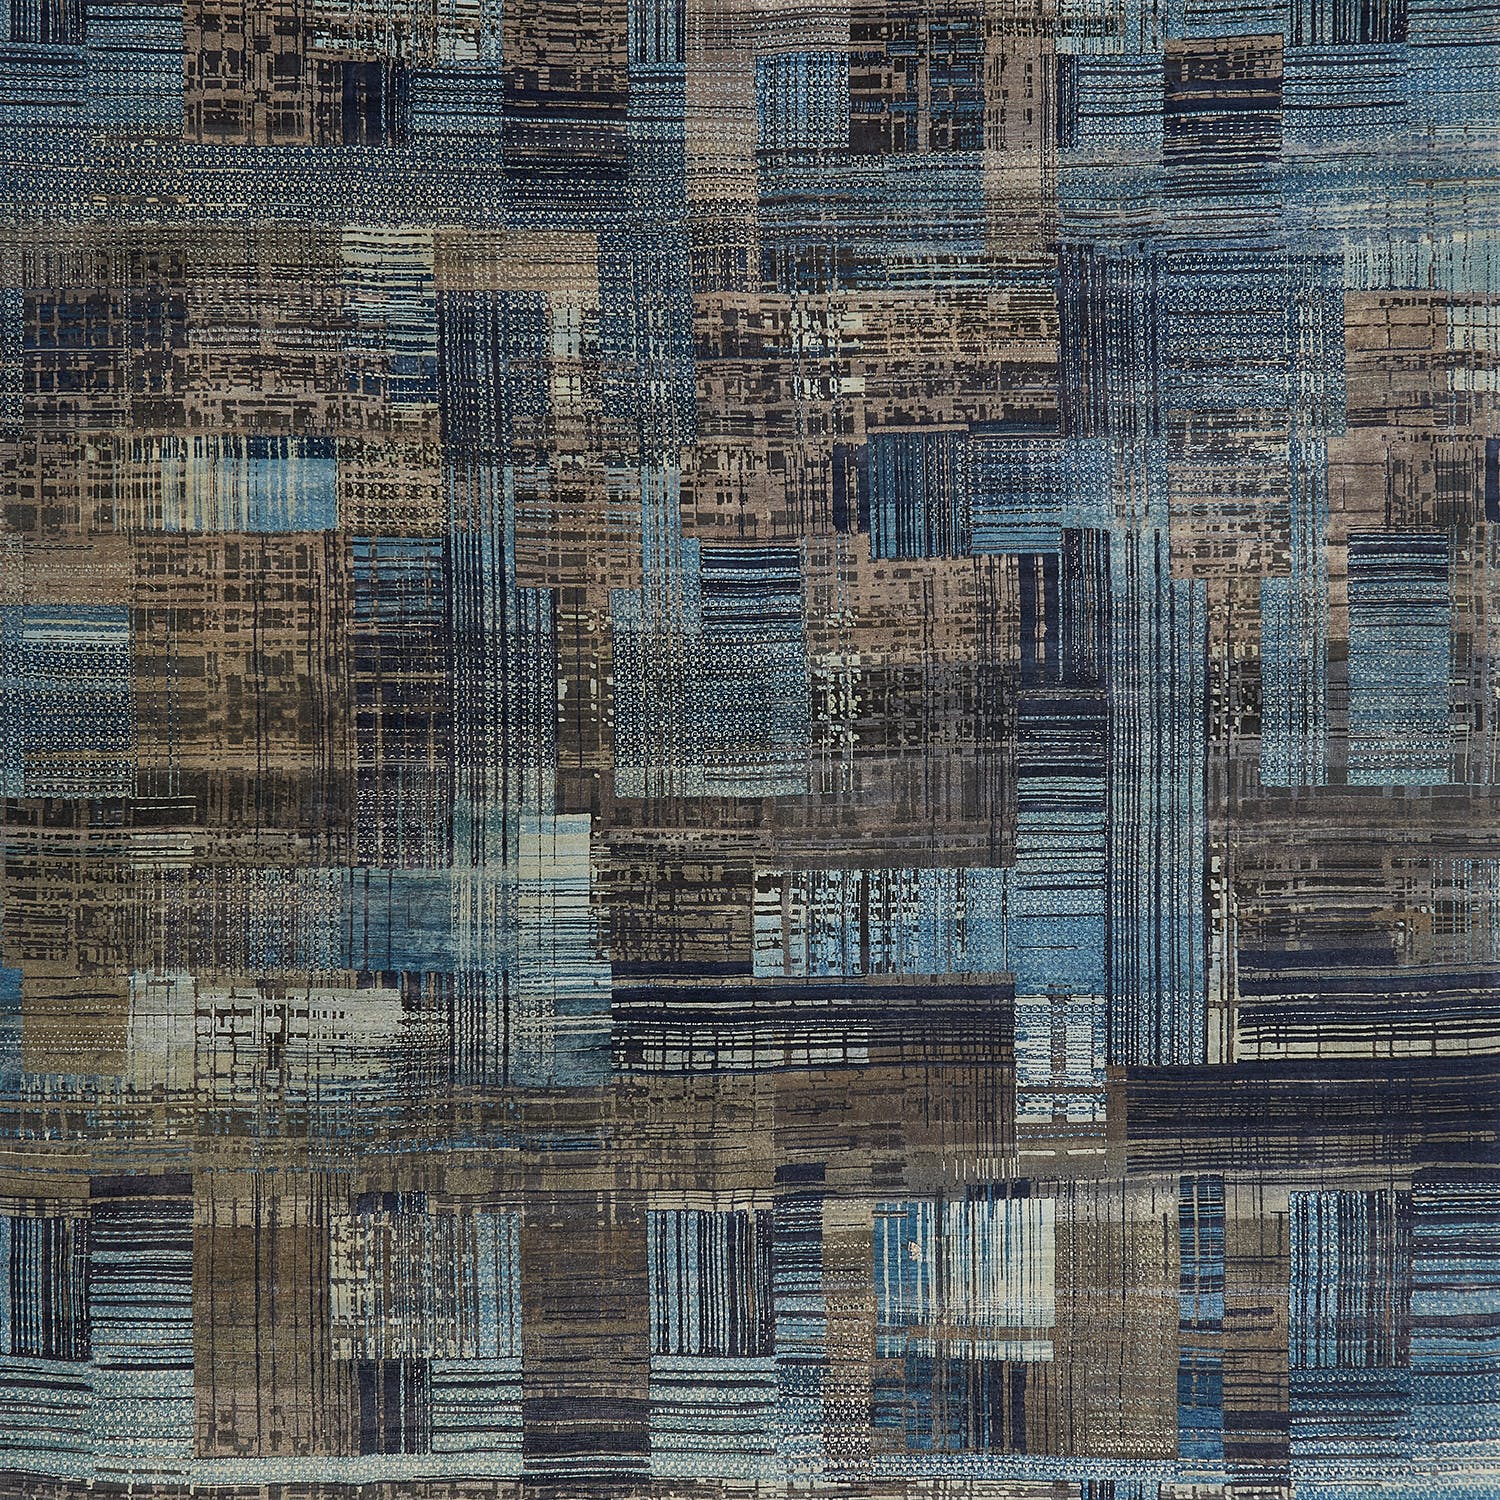 Complex interwoven pattern of textured rectangles in deep blues and browns.